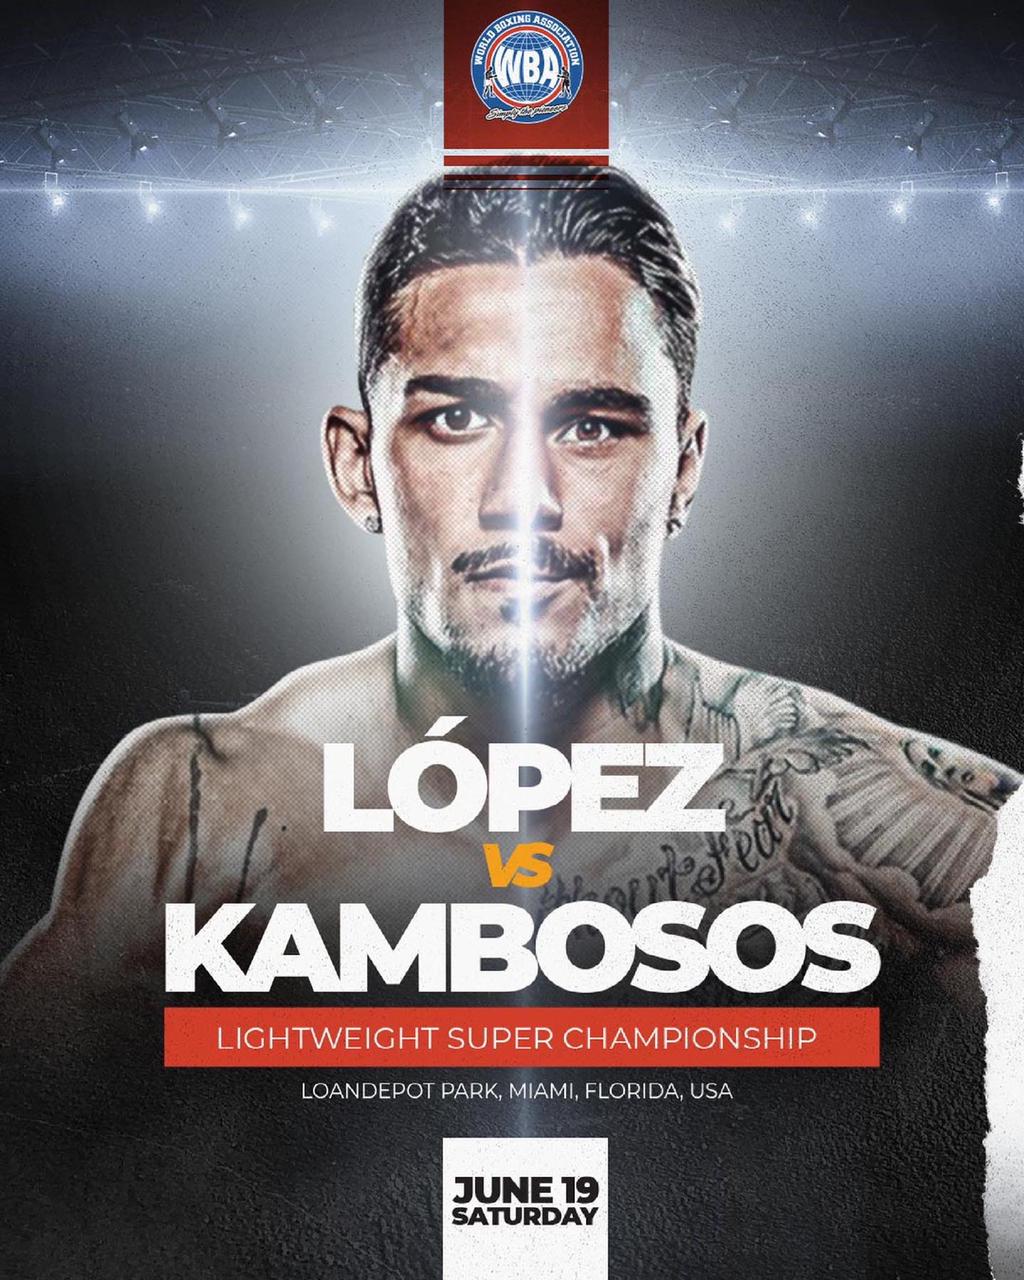 Teofimo-Kambosos Jr. in undefeated duel for the WBA belt